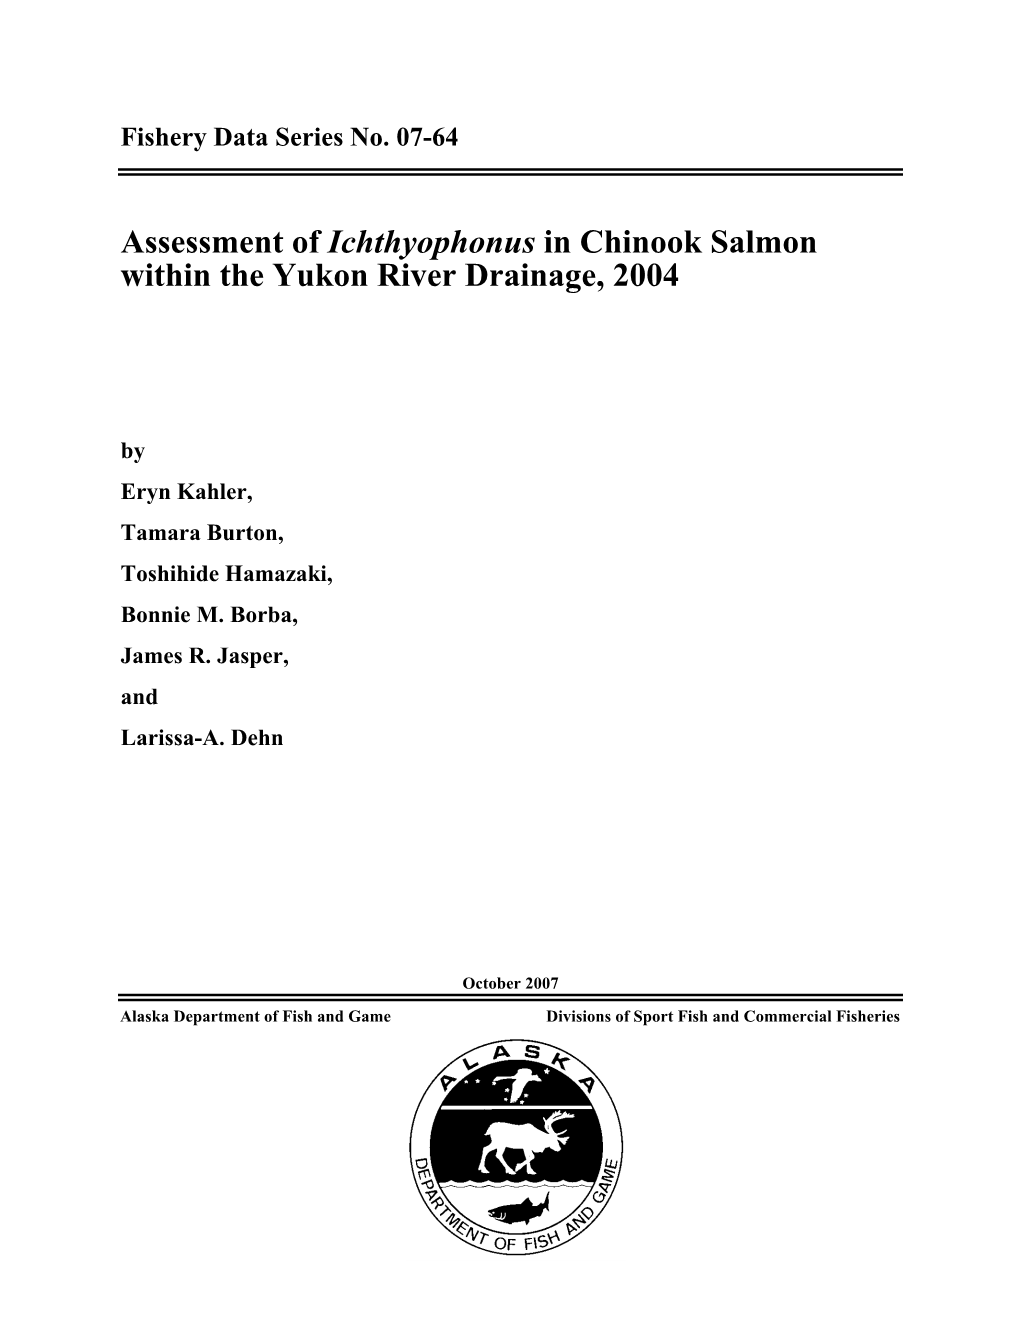 Assessment of Ichthyophonus in Chinook Salmon Within the Yukon River Drainage, 2004